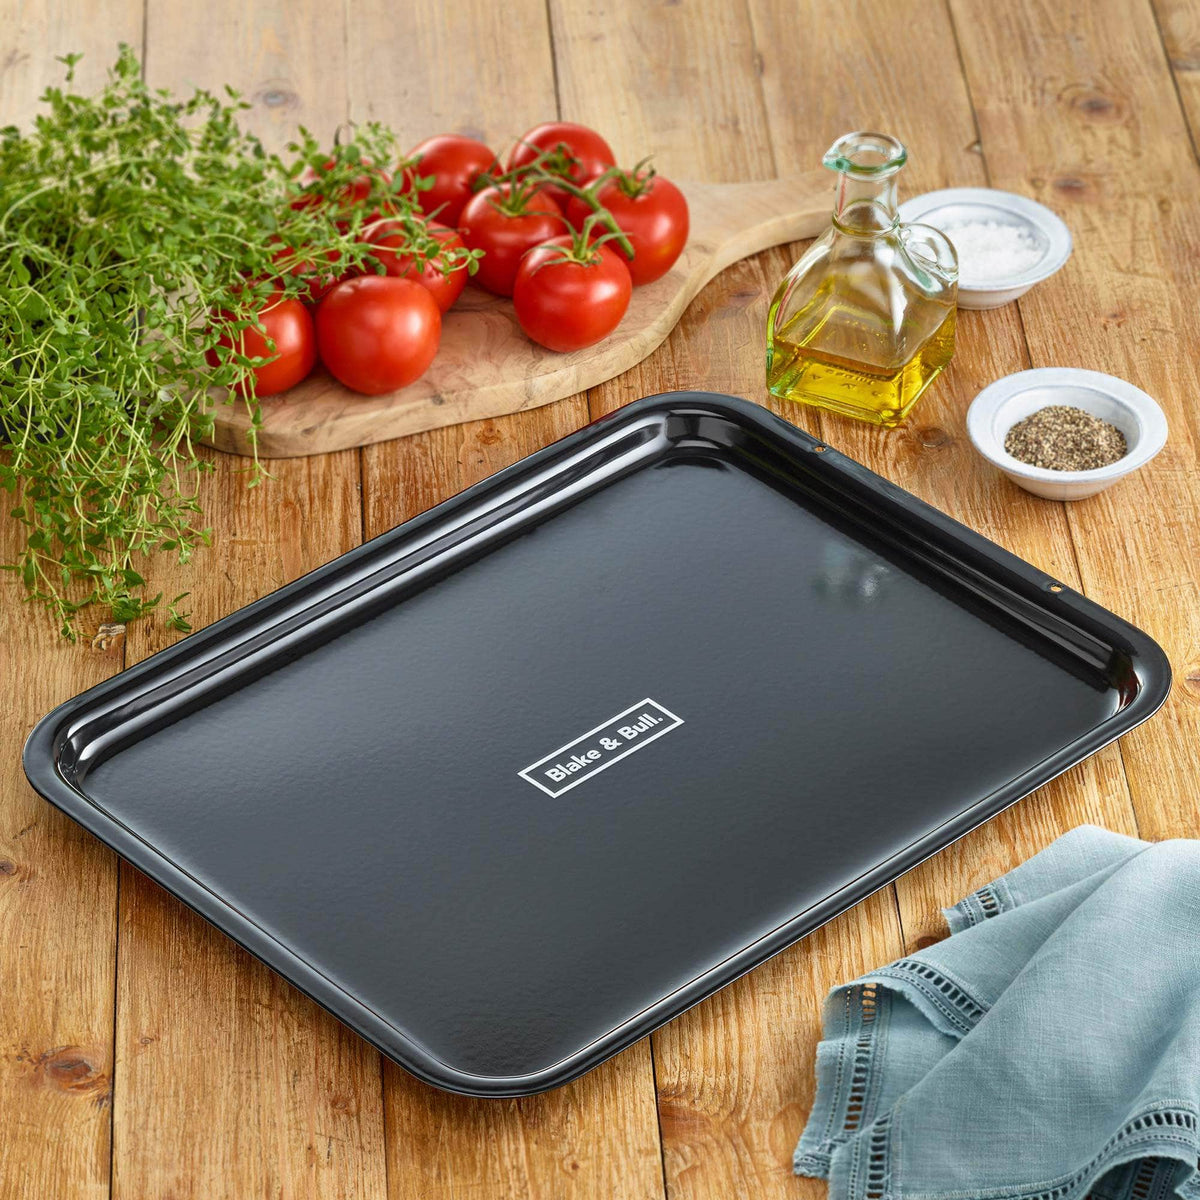 &#39;Fits on runners&#39; black enamelled baking tray for use with Aga range cookers &#39;full oven&#39; size